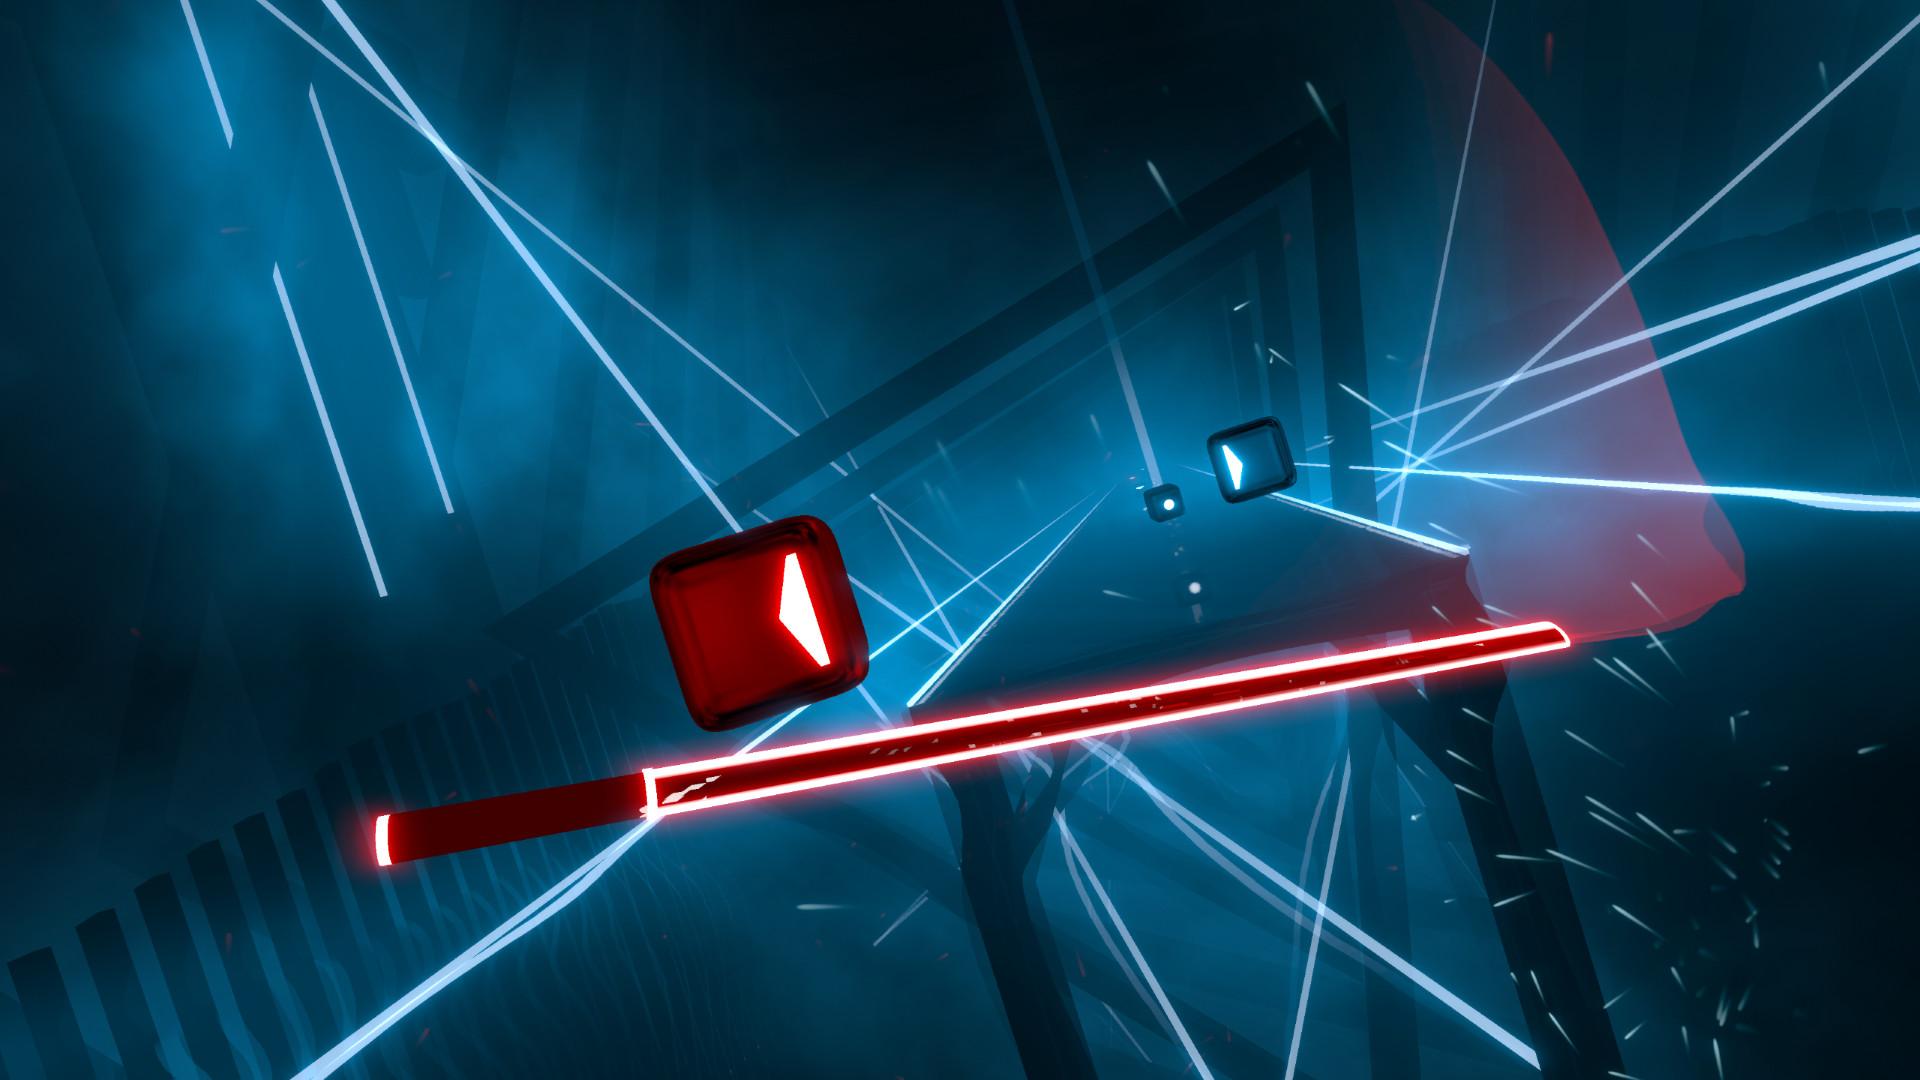 The unstoppable Beat Saber is coming to Oculus Quest